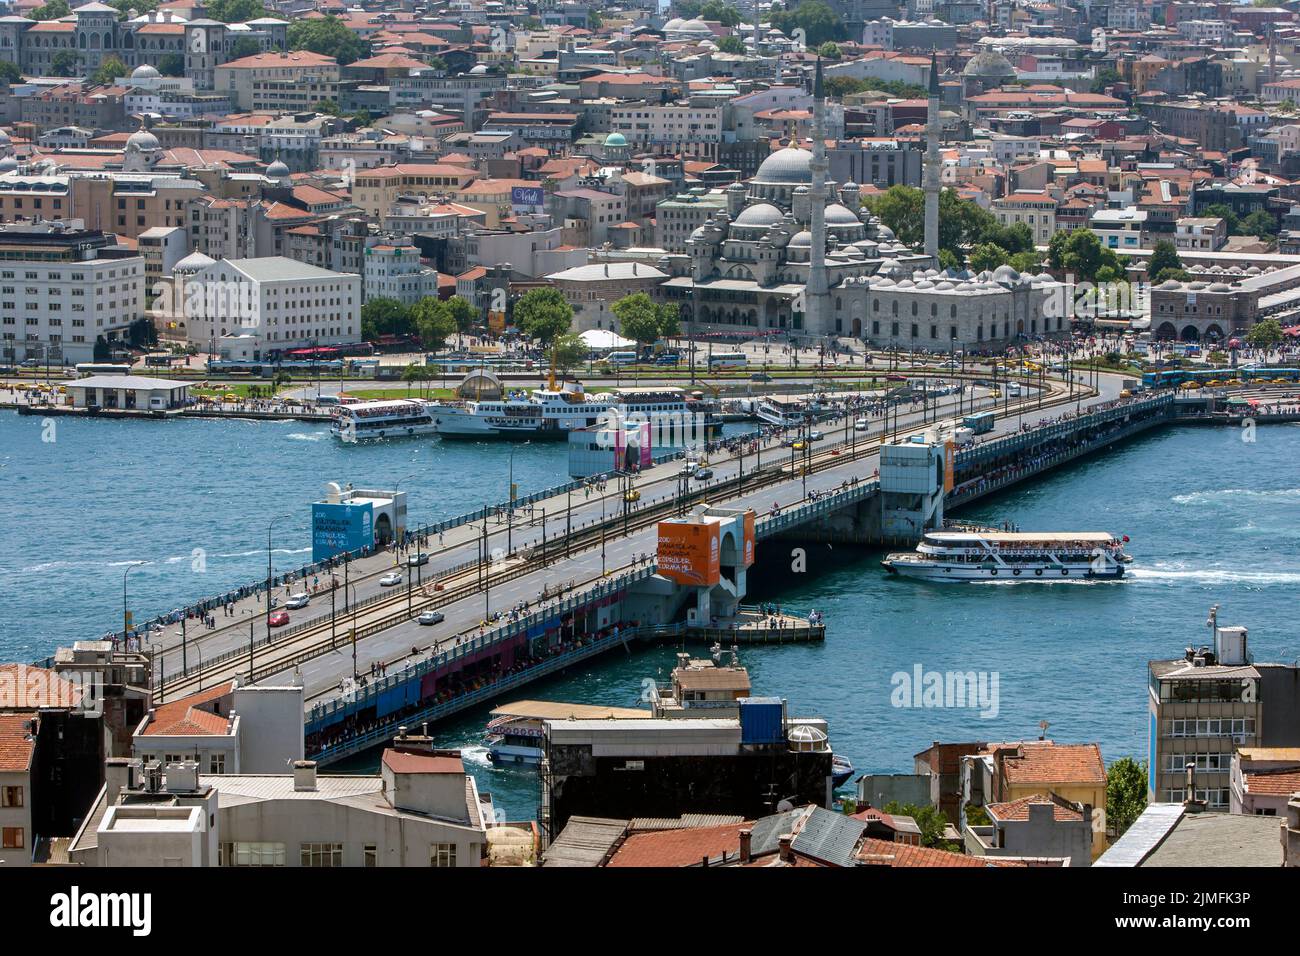 A view looking towards Galata Bridge on Golden Horn at Istanbul in Turkey as a ferry boat passes under. Stock Photo